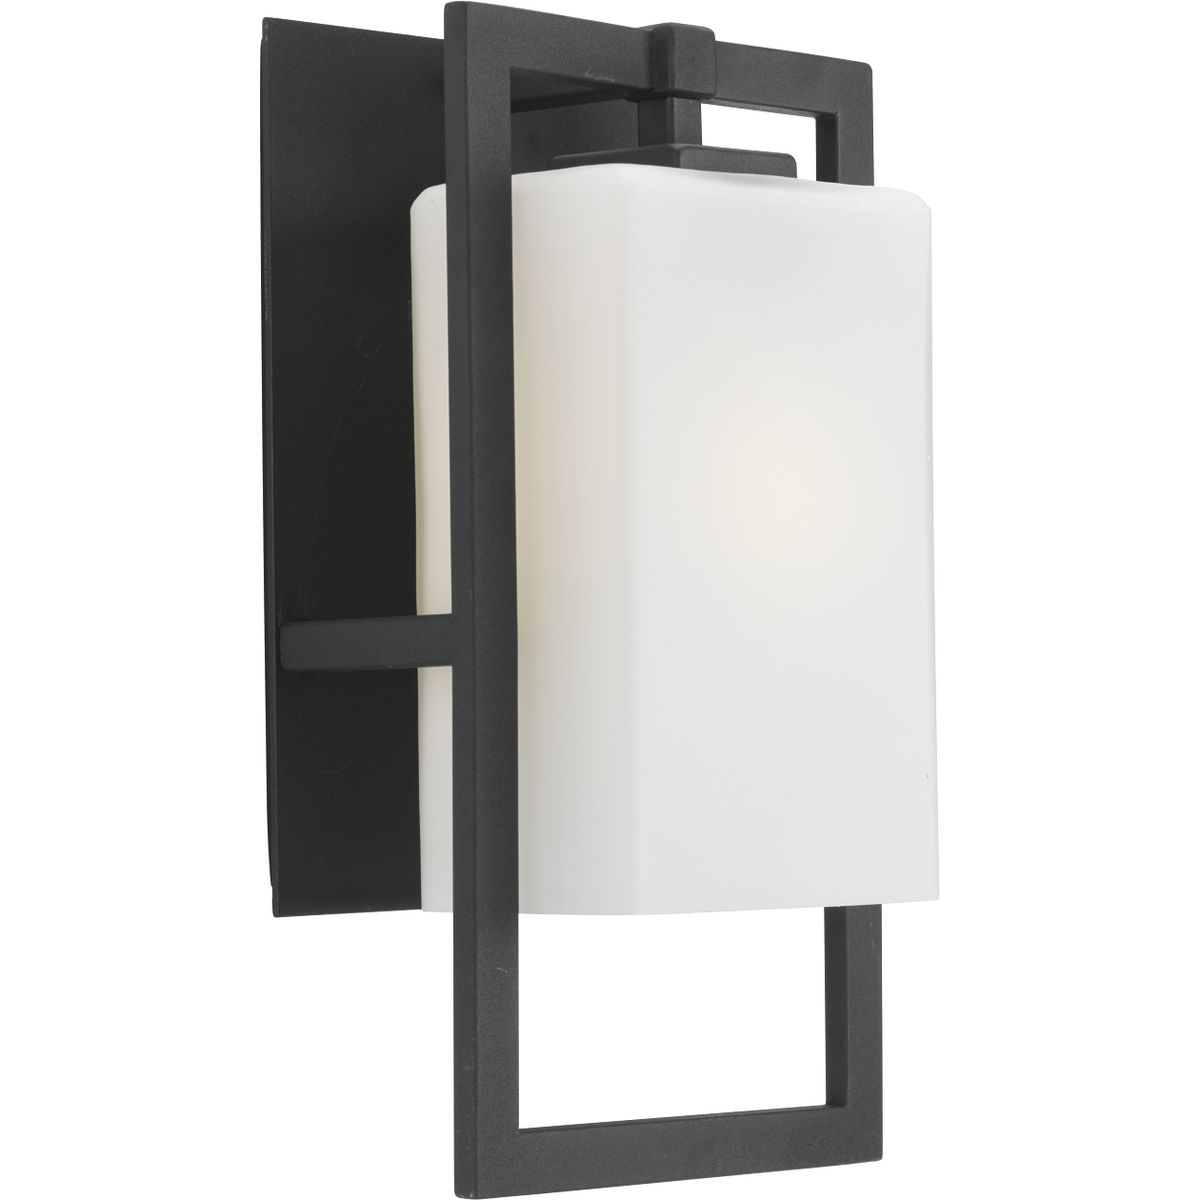 P5949-31 1-100W MED WALL SCONCE